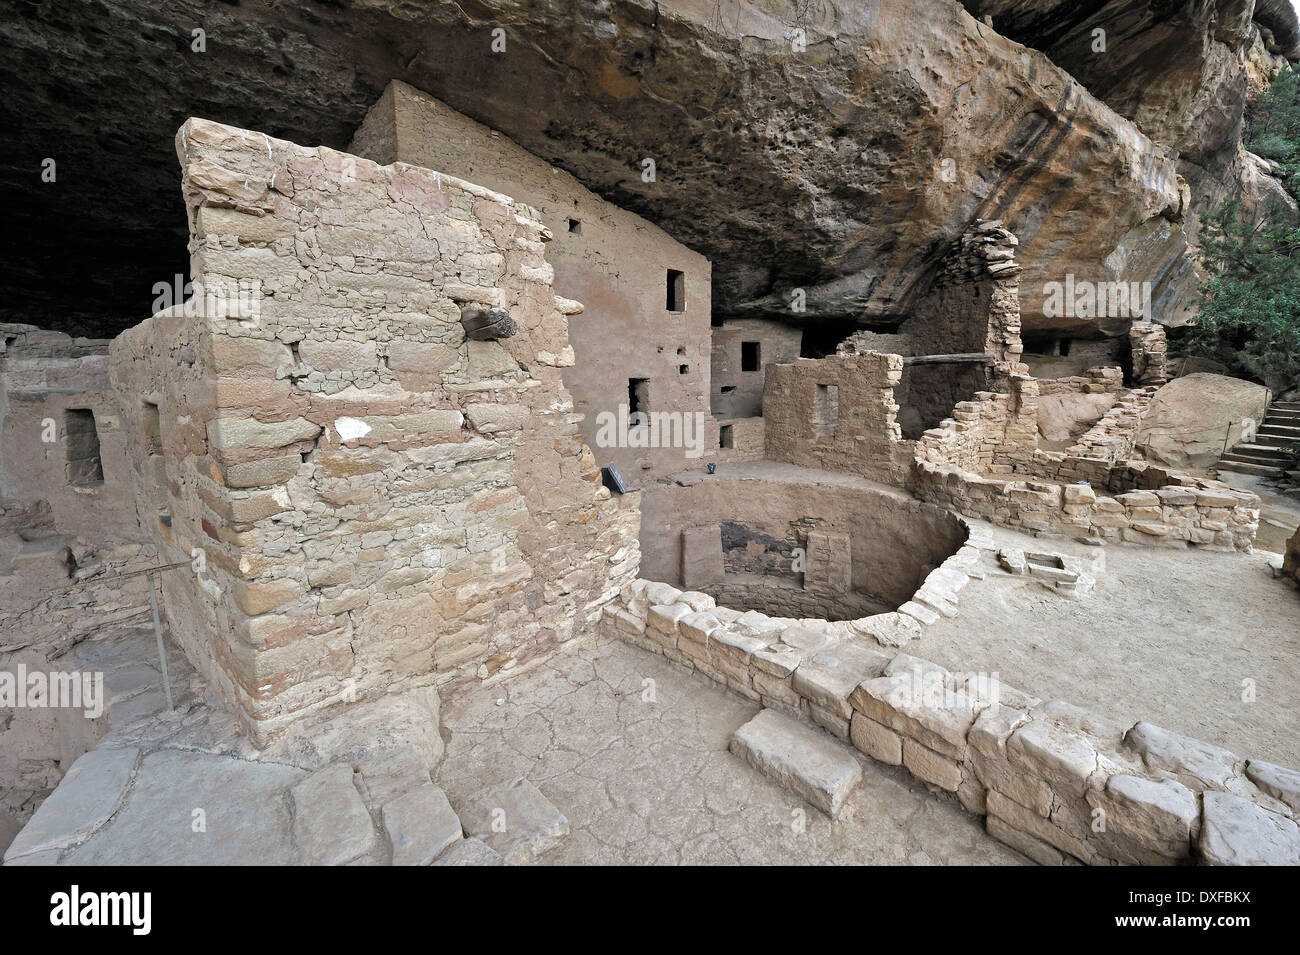 Spruce Tree House, cliff dwelling of native Americans, about 800 years old, Mesa Verde National Park, Colorado, USA Stock Photo